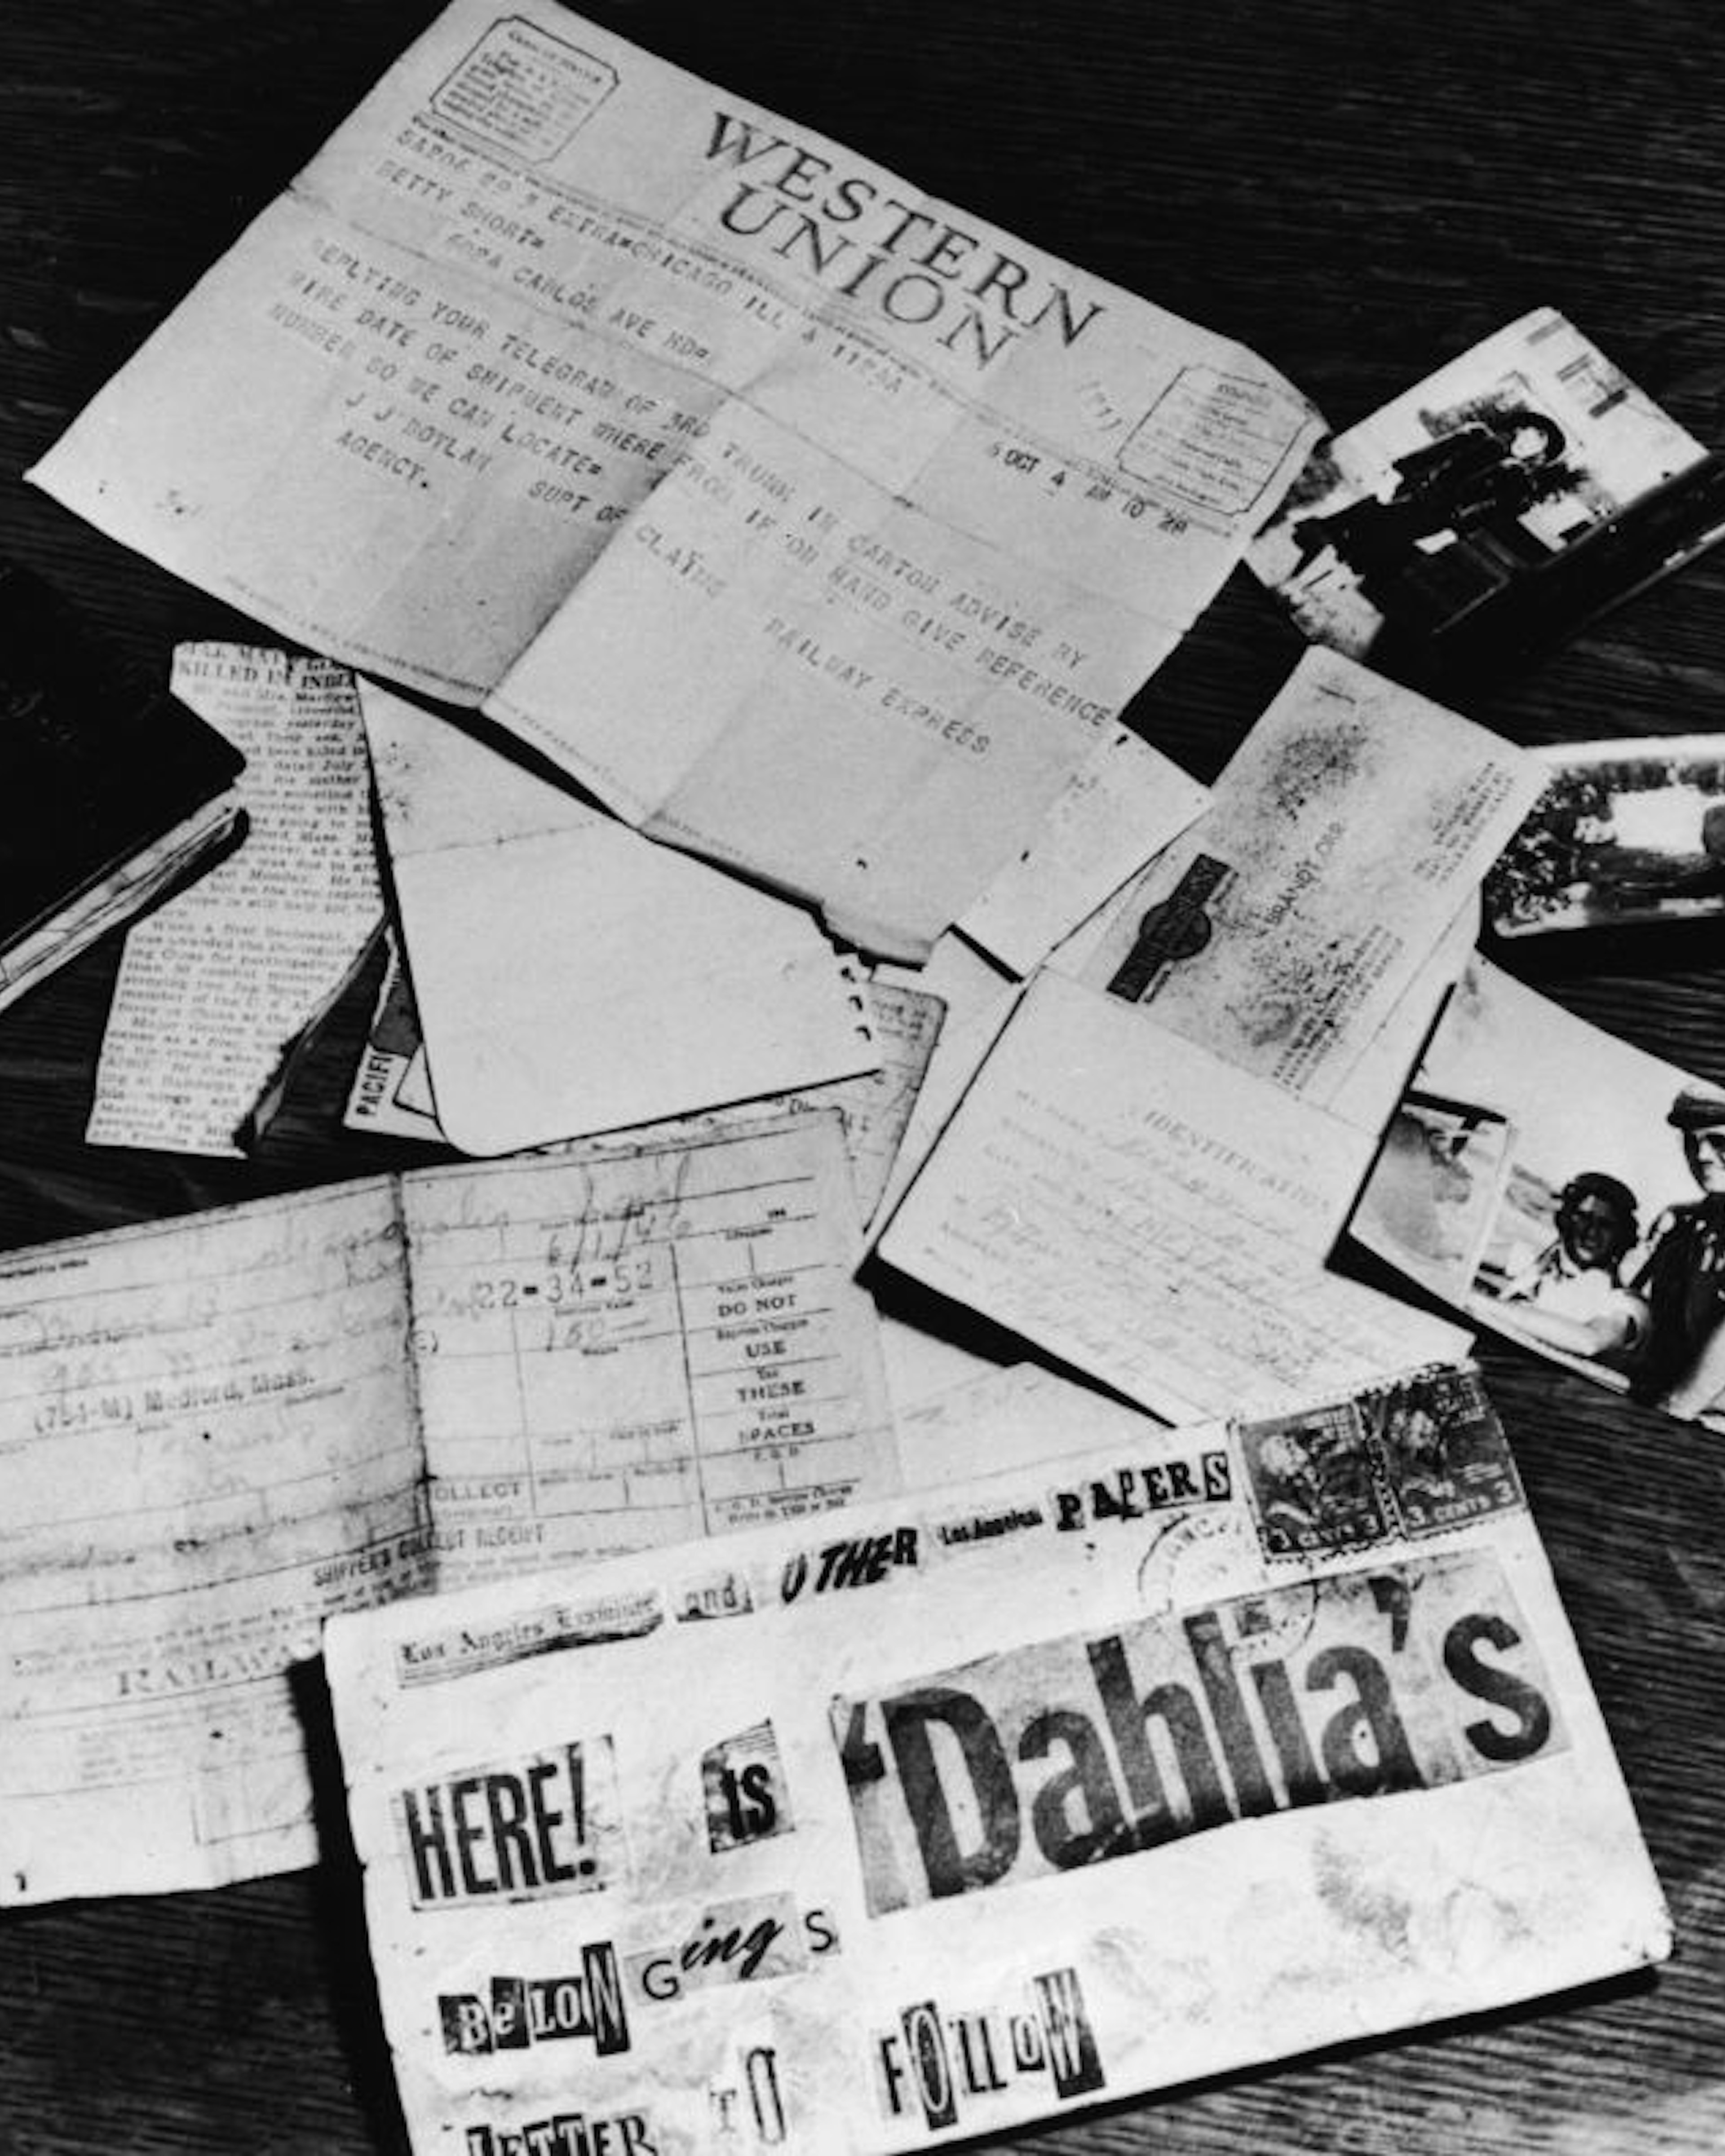 Evidence concerning the murder of American aspiring actress and murder victim Elizabeth Short (1924 - 1947), known as the 'Black Dahlia,' is strown across a table at the Los Angeles District Attorney's office, Los Angeles, California, 1947. On the table is a black address book, a newspaper clipping about the death of Short's supposed fiance and American Amy Major Matthew M. Gordon Jr., Short's birth certificate, a business card, a threatening letter assembled from newspaper lettering, a baggage check from a Greyhound bus depot, a Western Union telegram, and several photographs of Short. (Photo by INTERNATIONAL NEWS PHOTO/Getty Images)